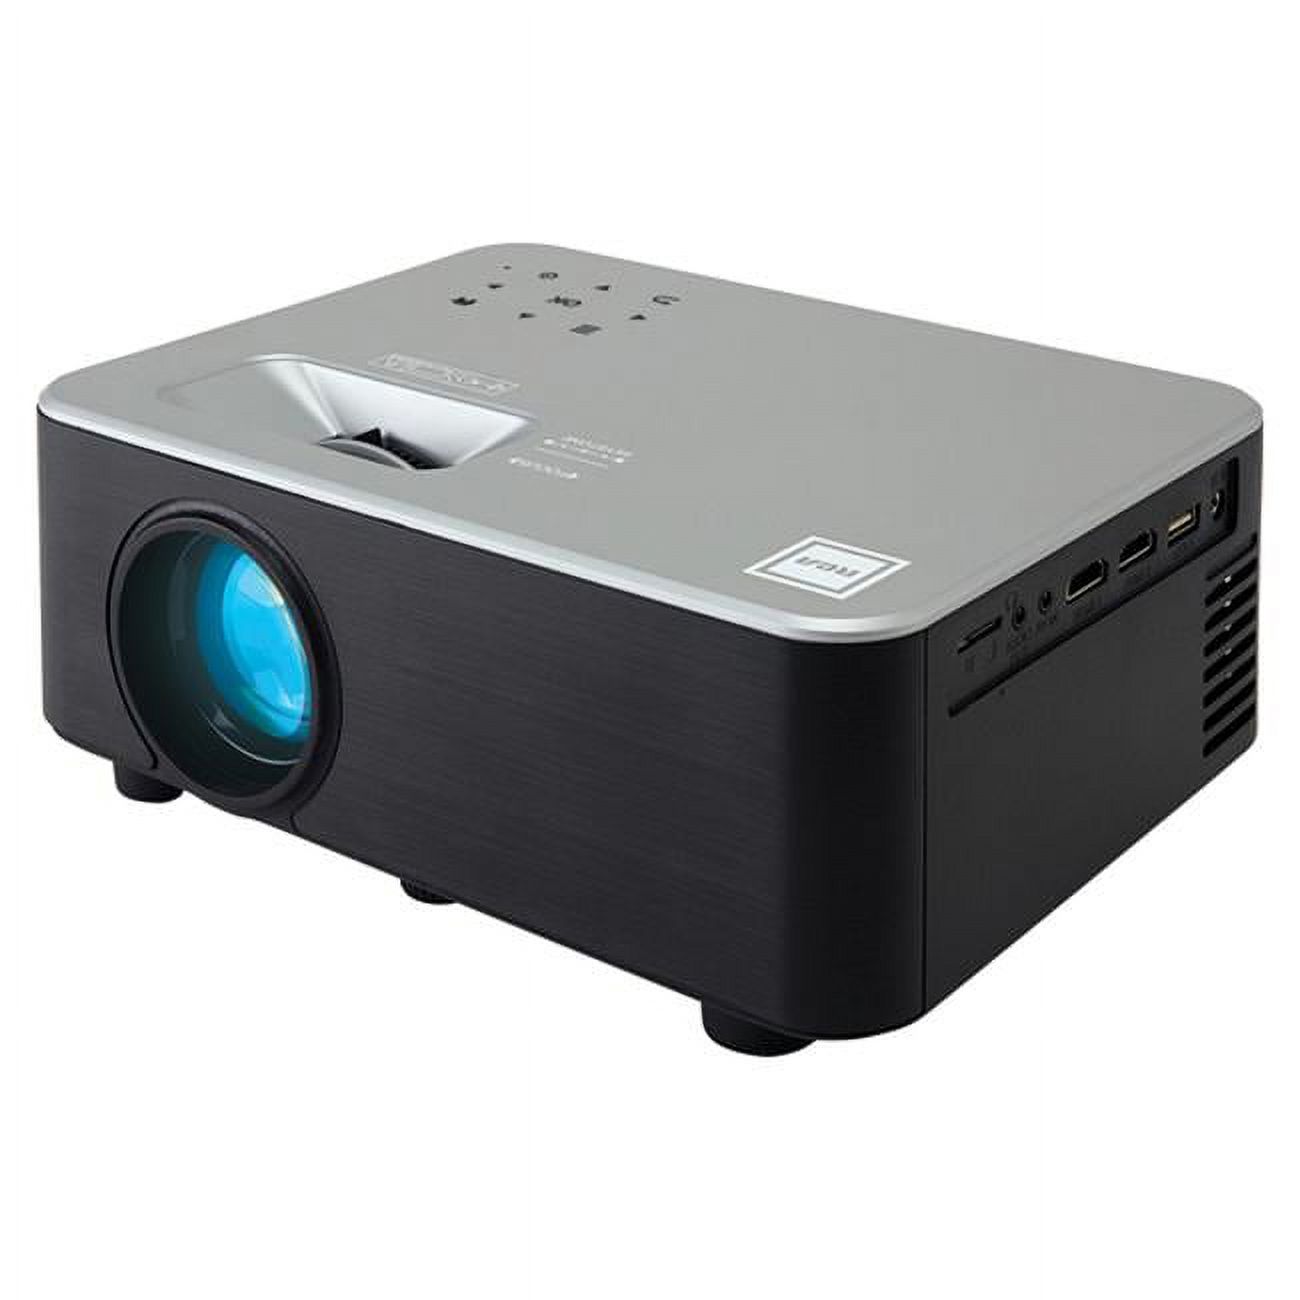 RCA 720p Smart Wi-Fi Home Theater Projector w/ Roku Stick - image 1 of 10